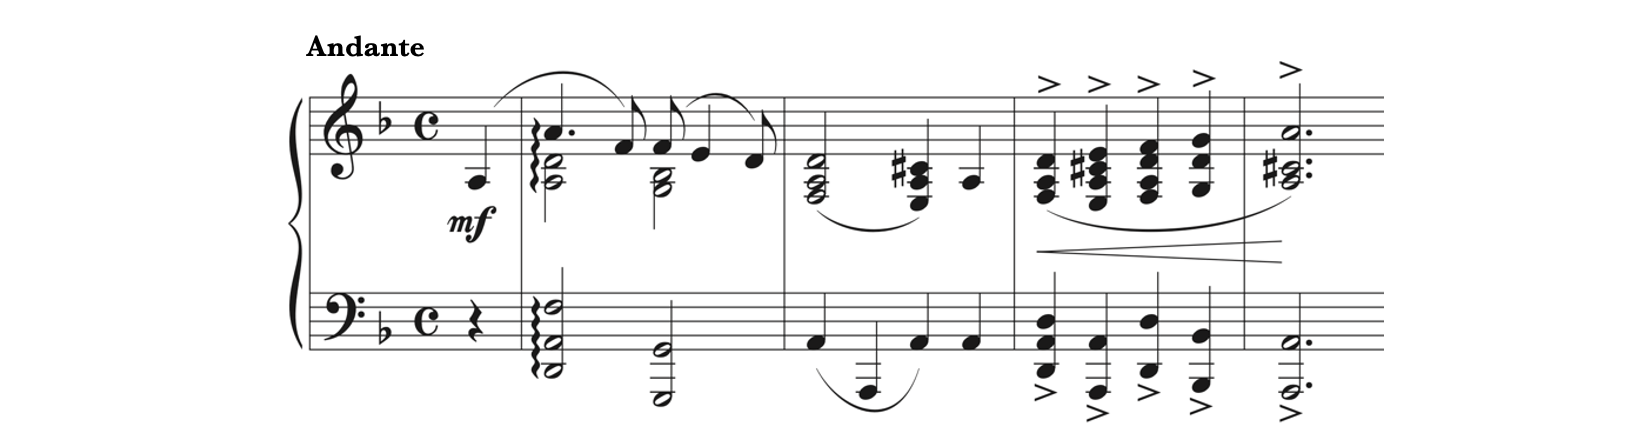 The given example is the first four bars of Vespermann's Bunte Reihen, opus 6, first movement, Charakterstück (for piano).